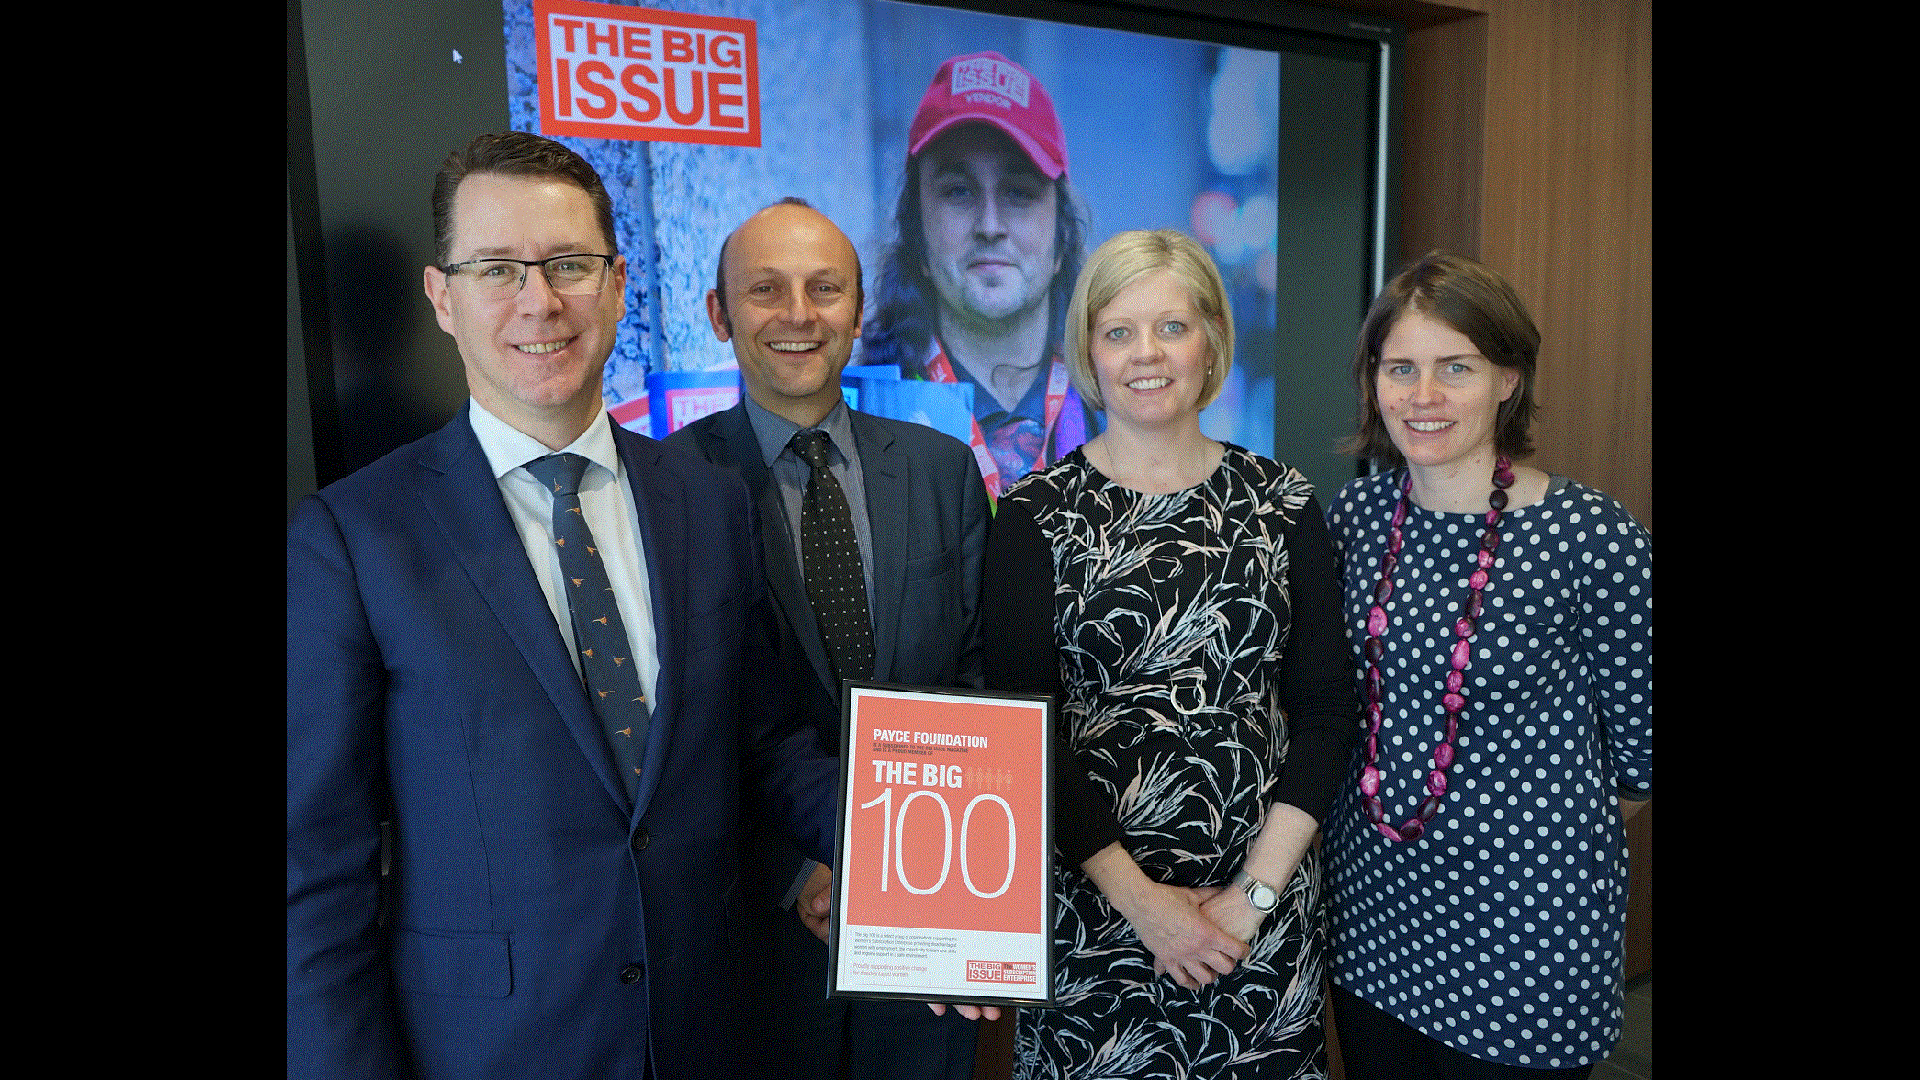 PAYCE Foundation supports The Big Issue